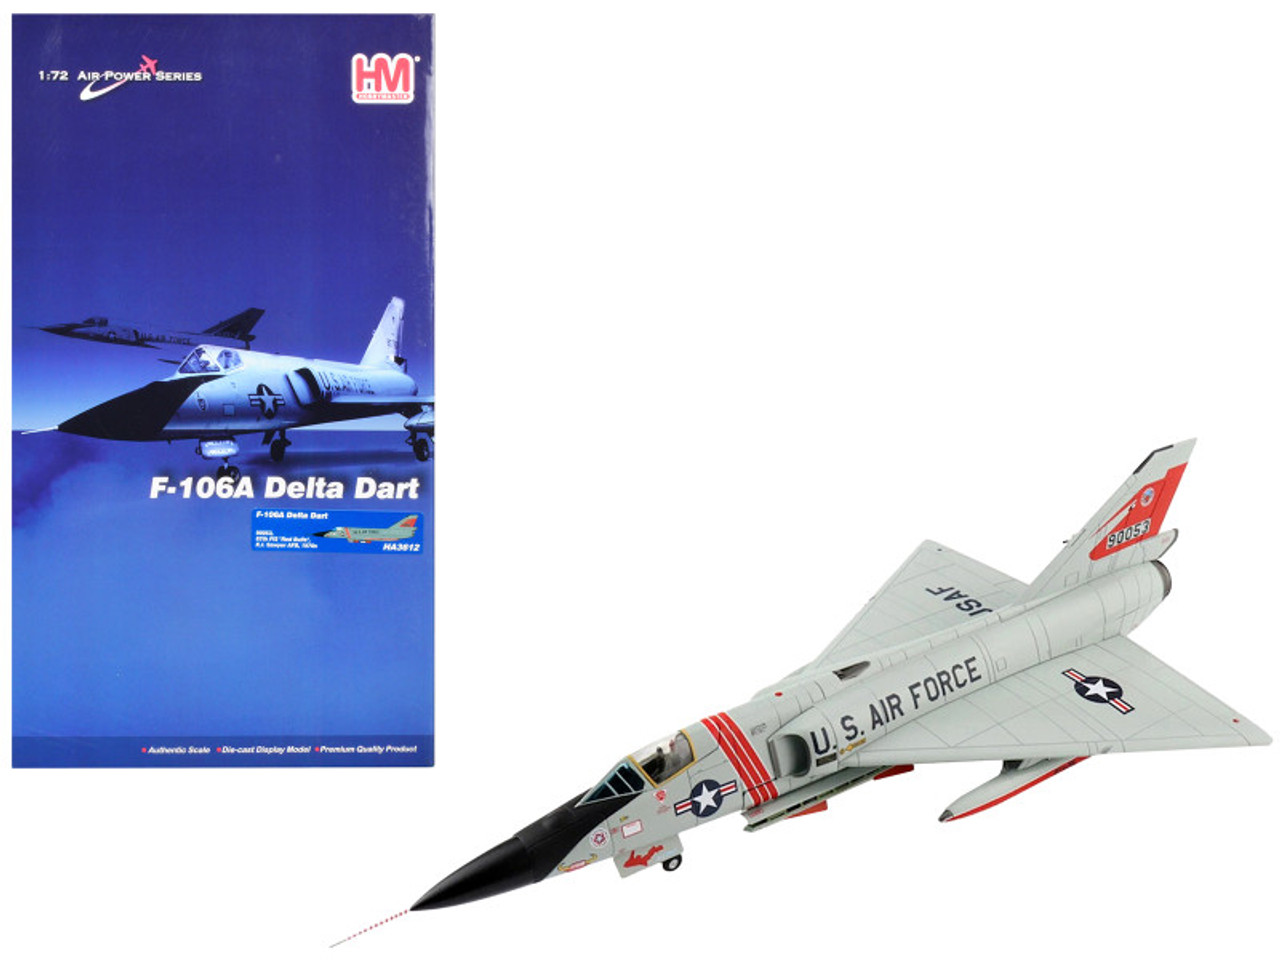 Convair F-106A Delta Dart Aircraft "87th FIS Red Bulls K.I. Sawyer AFB" United States Air Force (1970s) "Air Power Series" 1/72 Diecast Model by Hobby Master